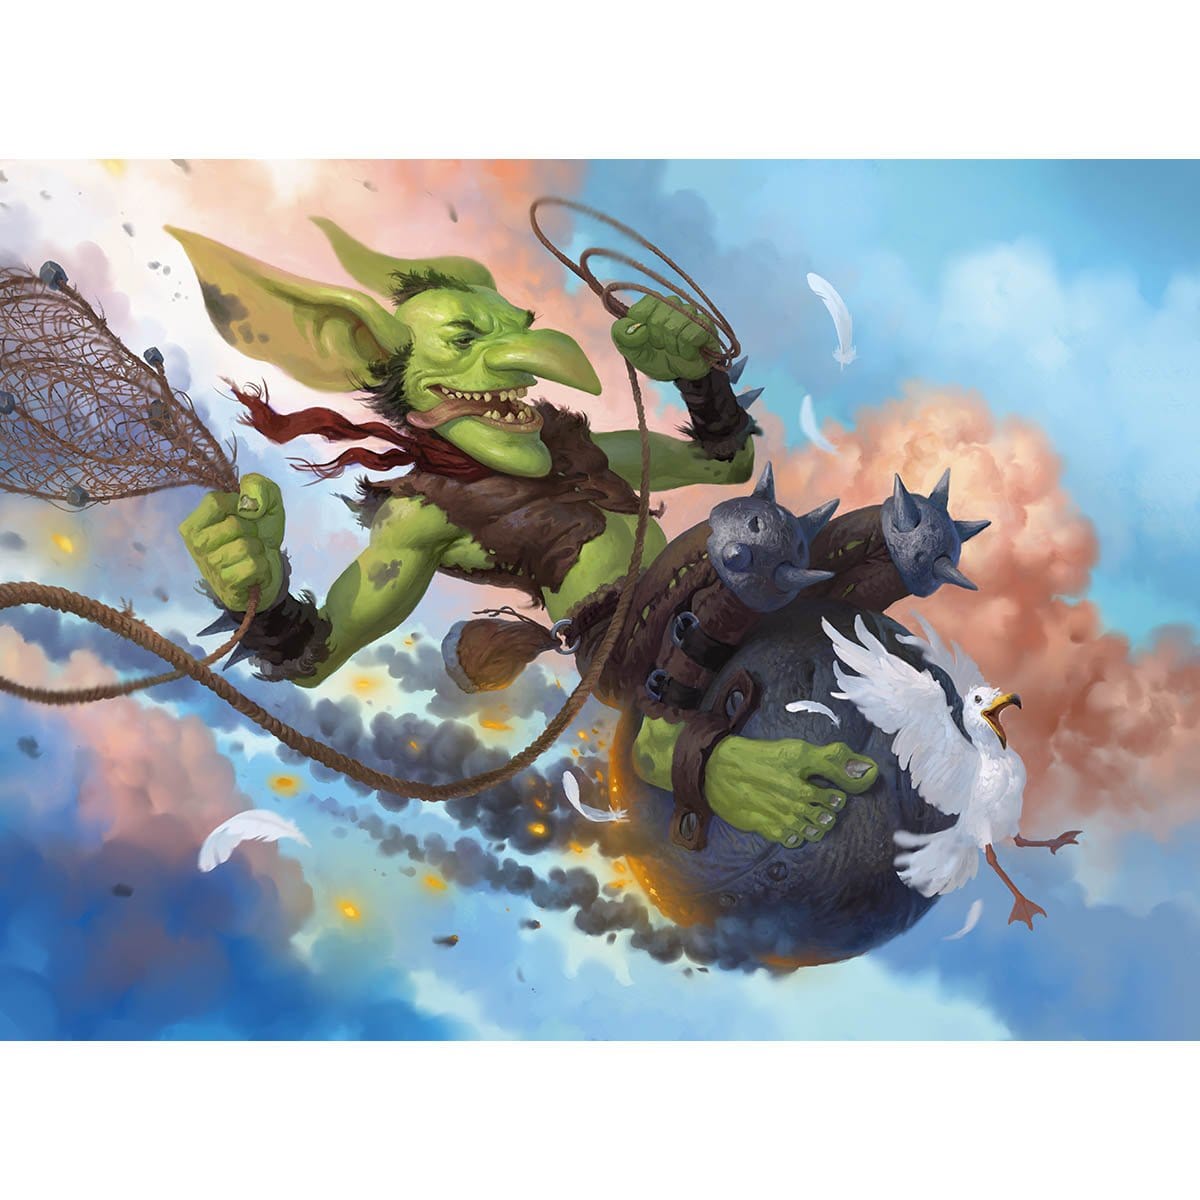 Reckless Air Strike Print - Print - Original Magic Art - Accessories for Magic the Gathering and other card games